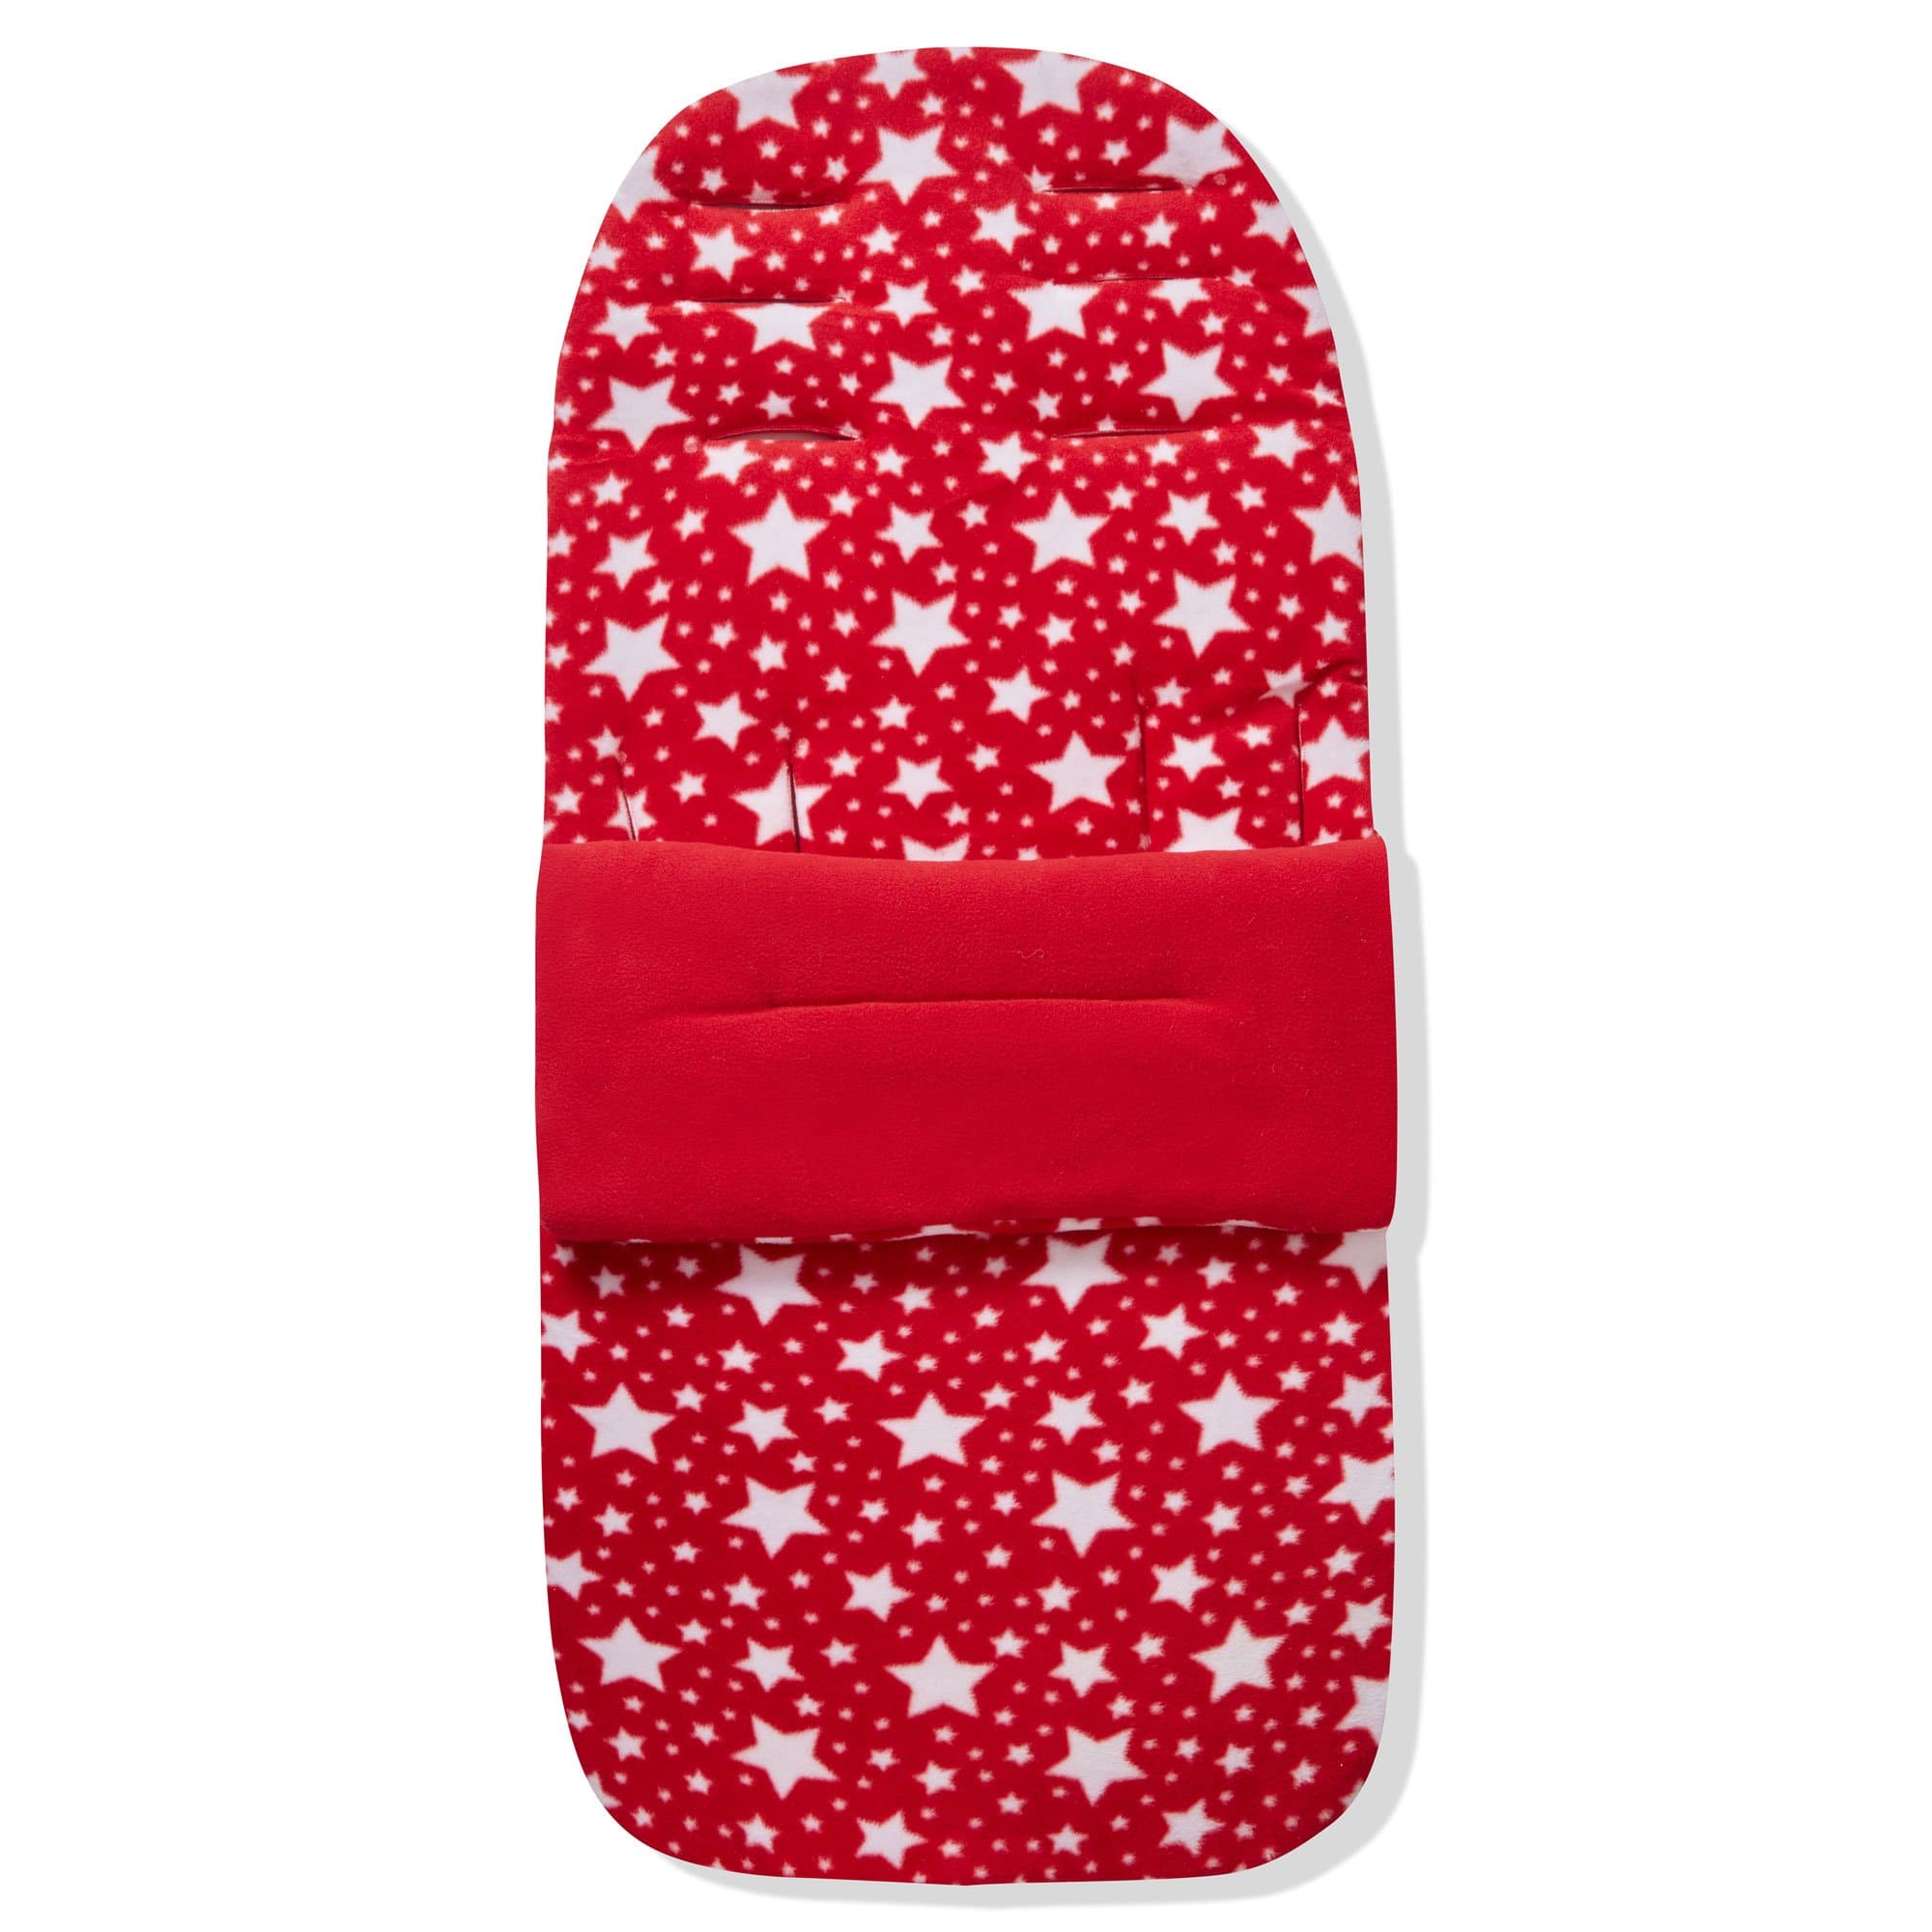 Fleece Footmuff / Cosy Toes Compatible with Kinderkraft - Red Star / Fits All Models | For Your Little One